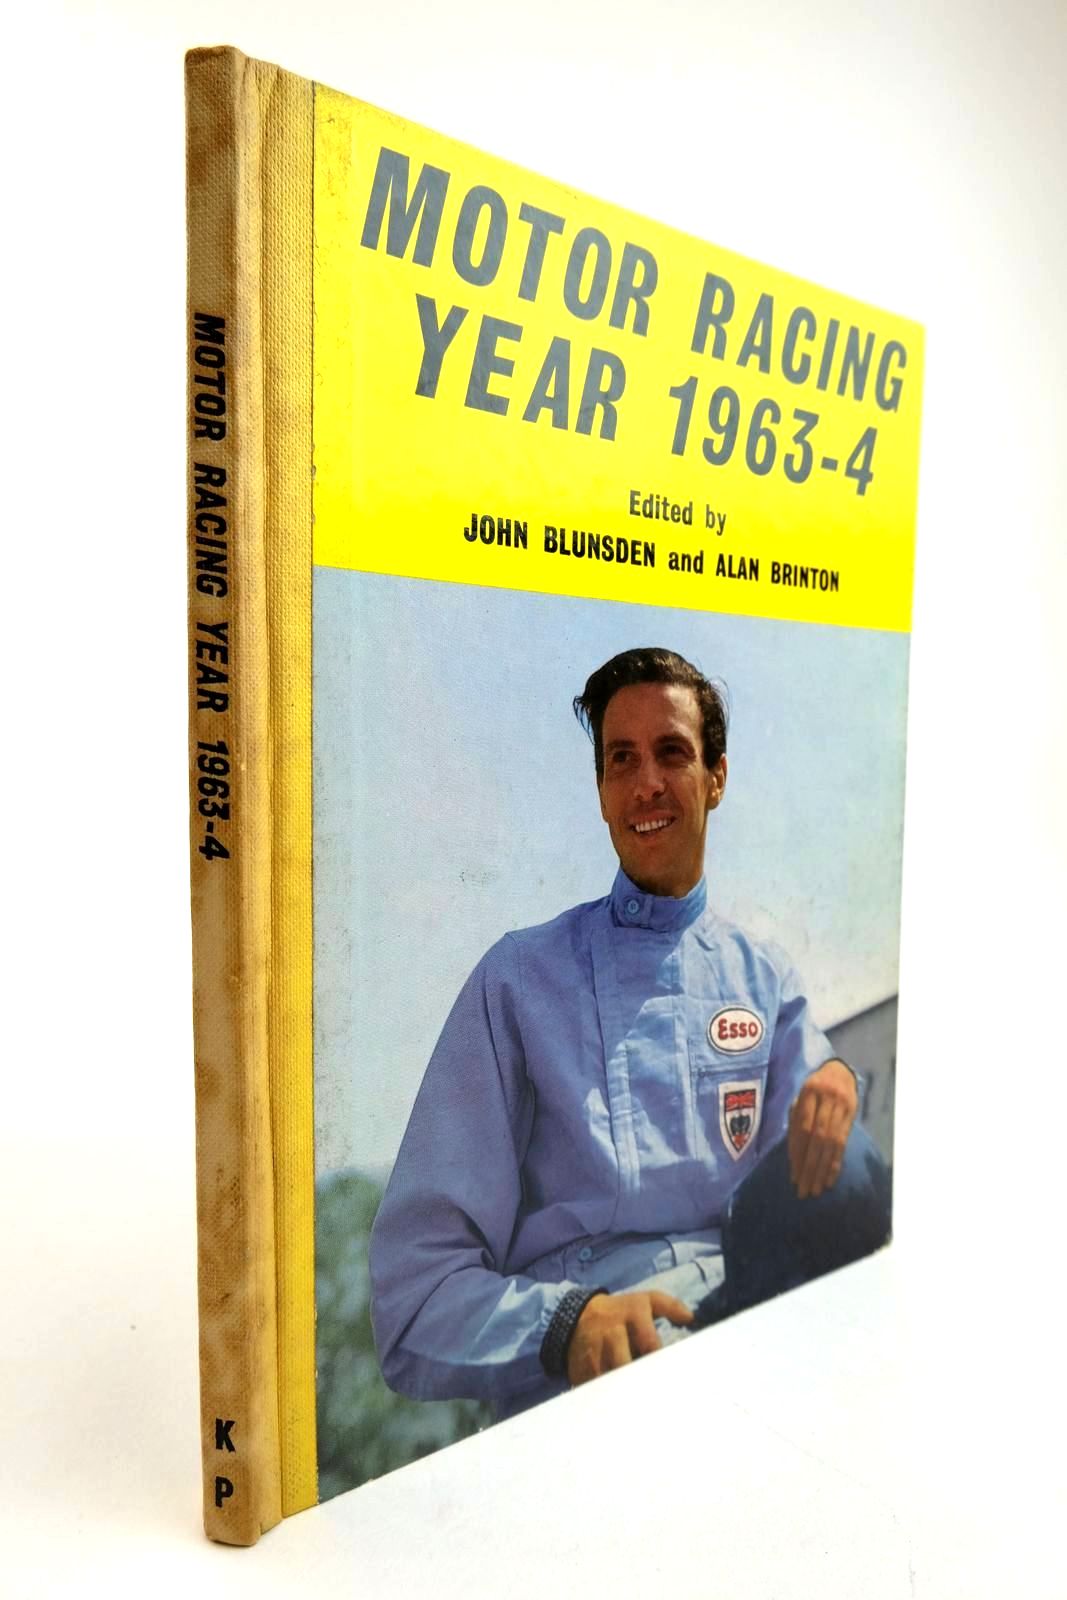 Photo of MOTOR RACING YEAR 1963-4- Stock Number: 2134306